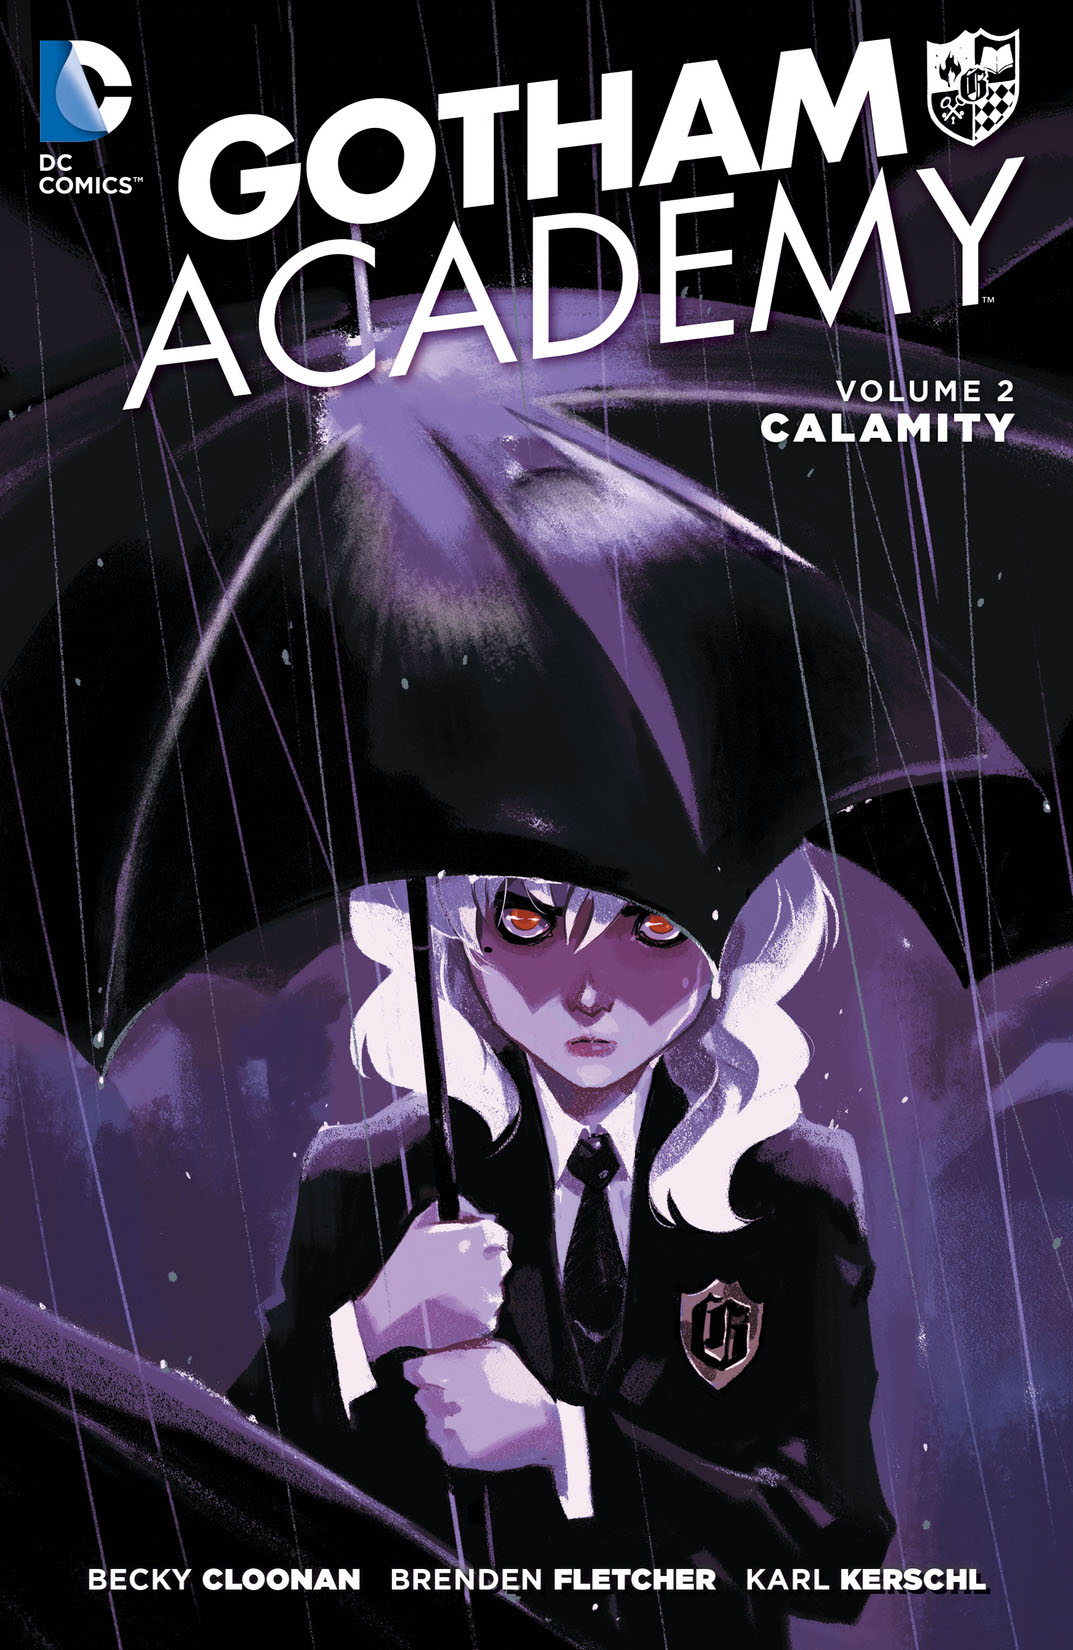 Gotham Academy Vol. 2: Calamity preview images